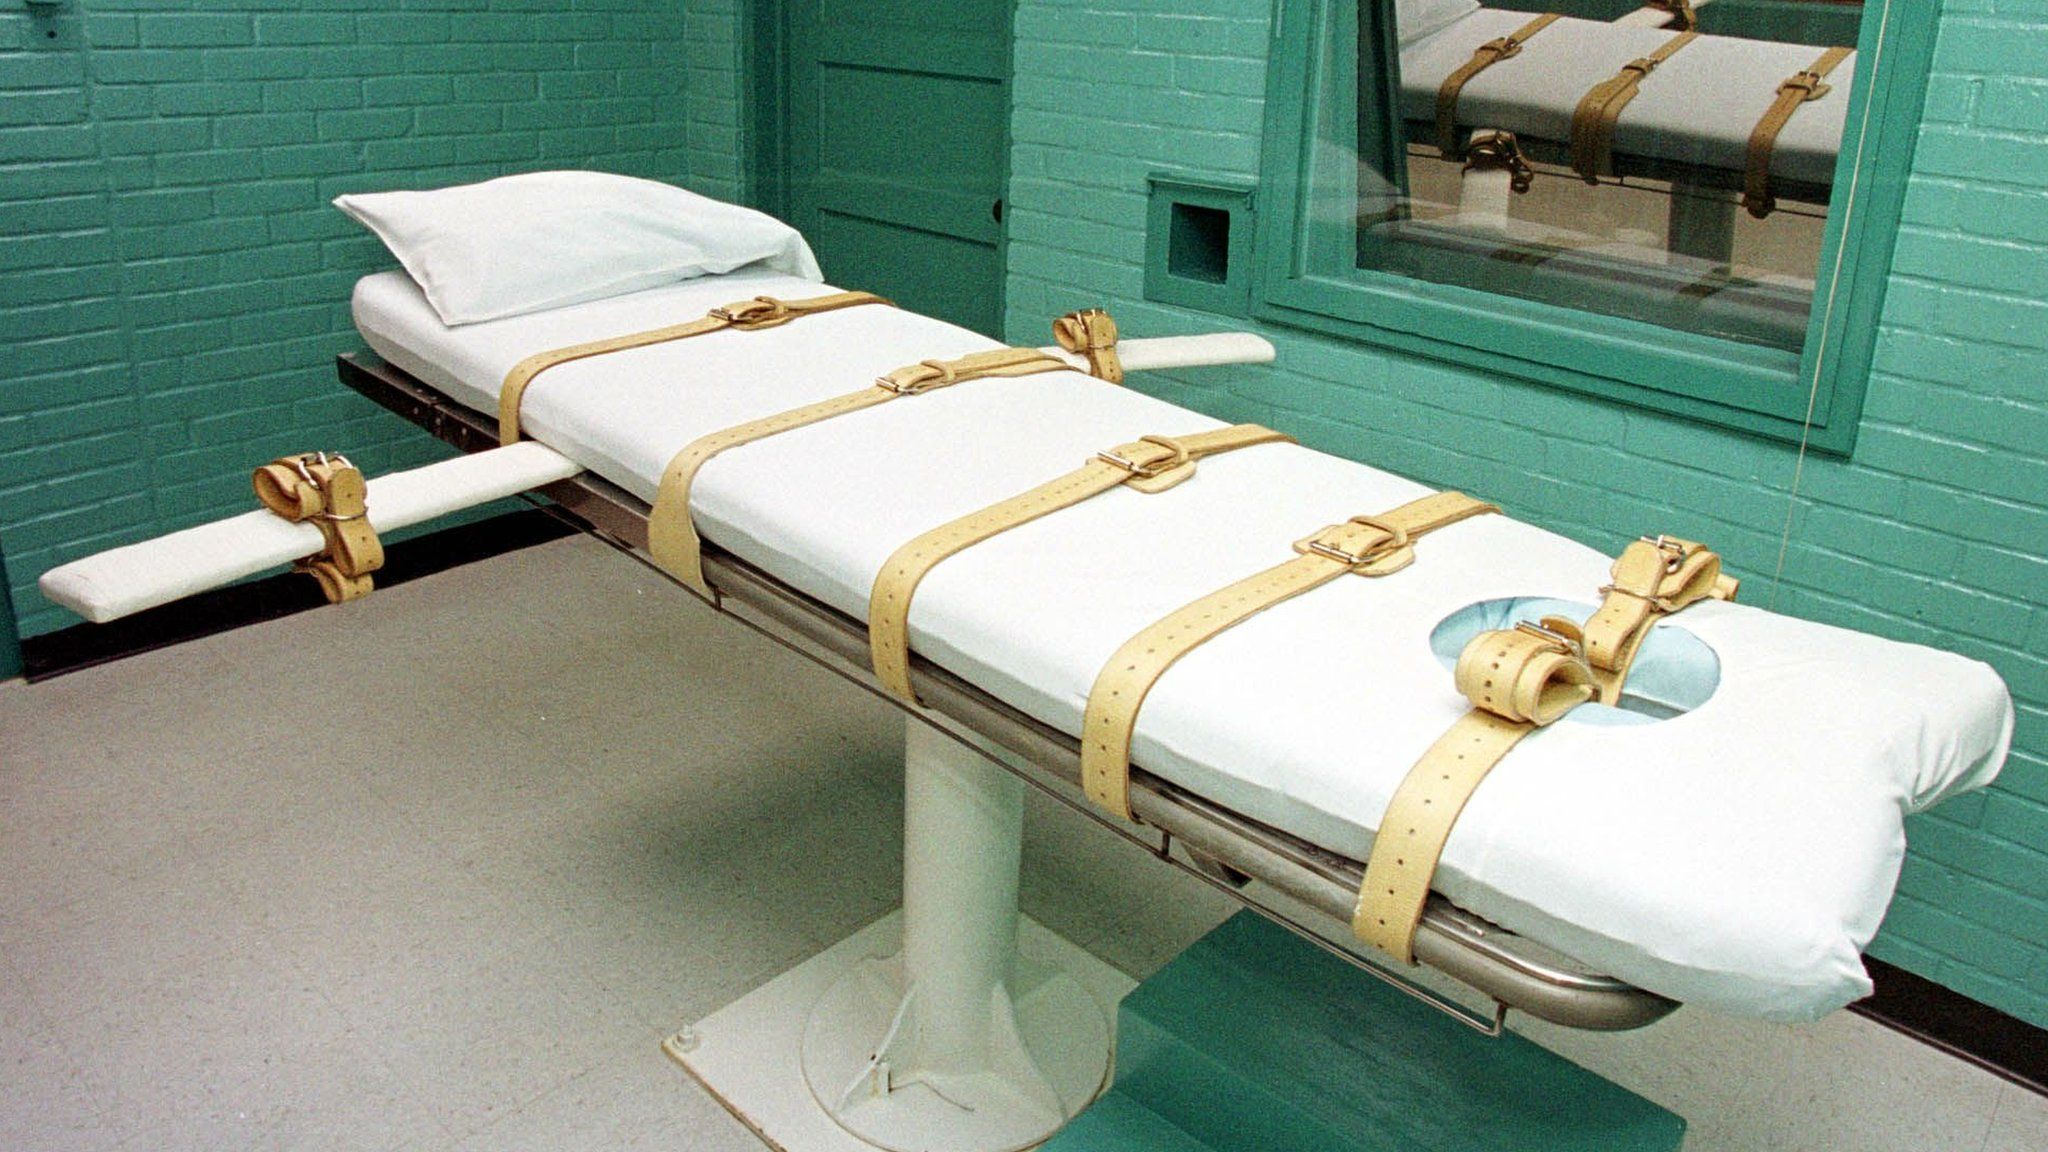 The "death chamber" where inmates are executed by lethal injection at a US state prison, 28 February 2000